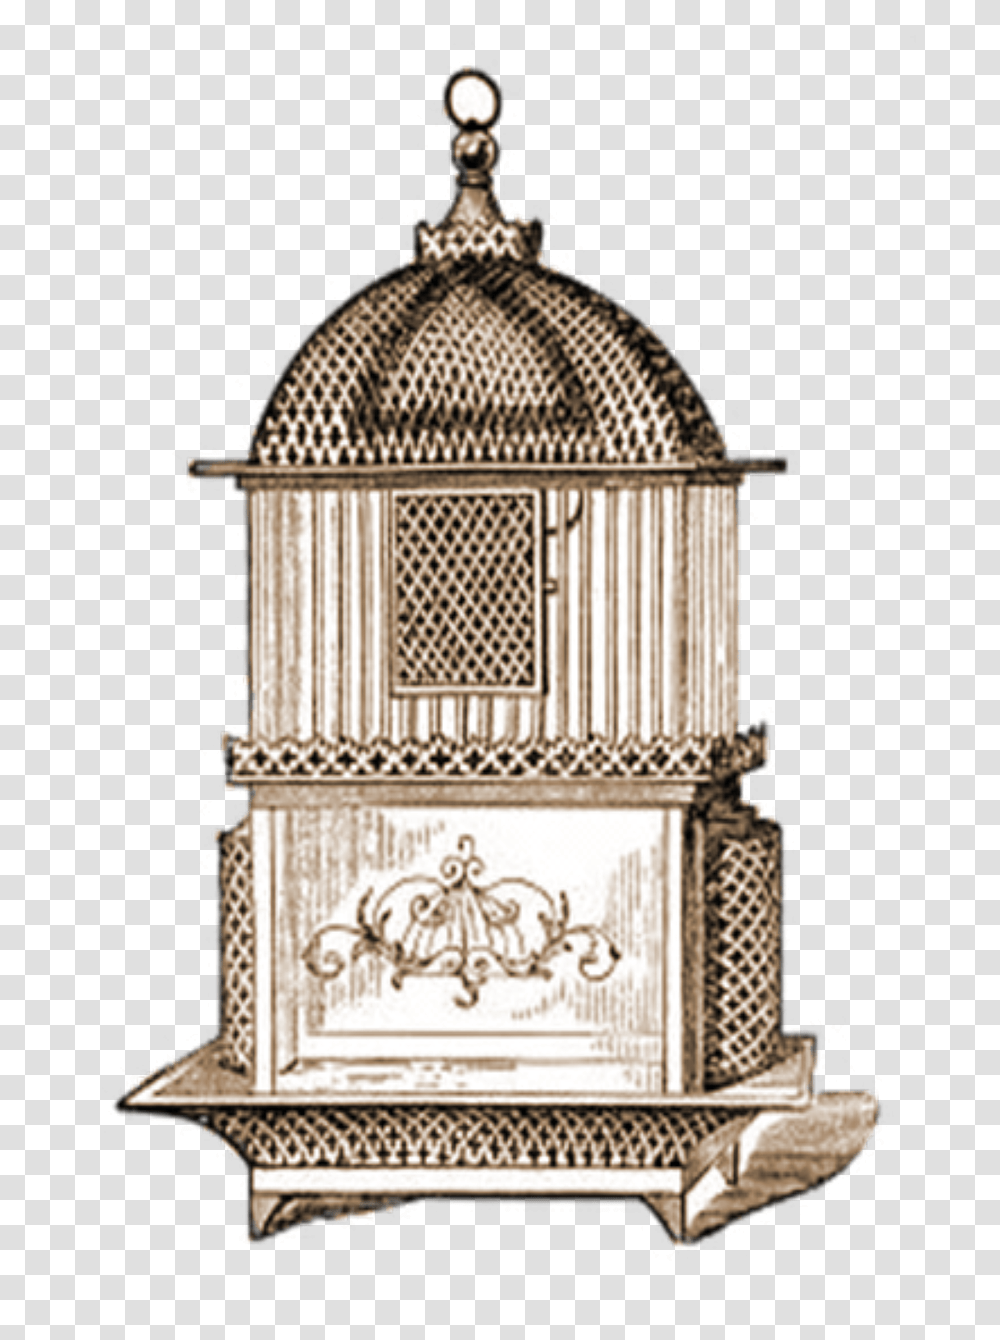 Bird Cage Element Morgan Harper Nichols For The Highs, Architecture, Building, Wedding Cake, Church Transparent Png